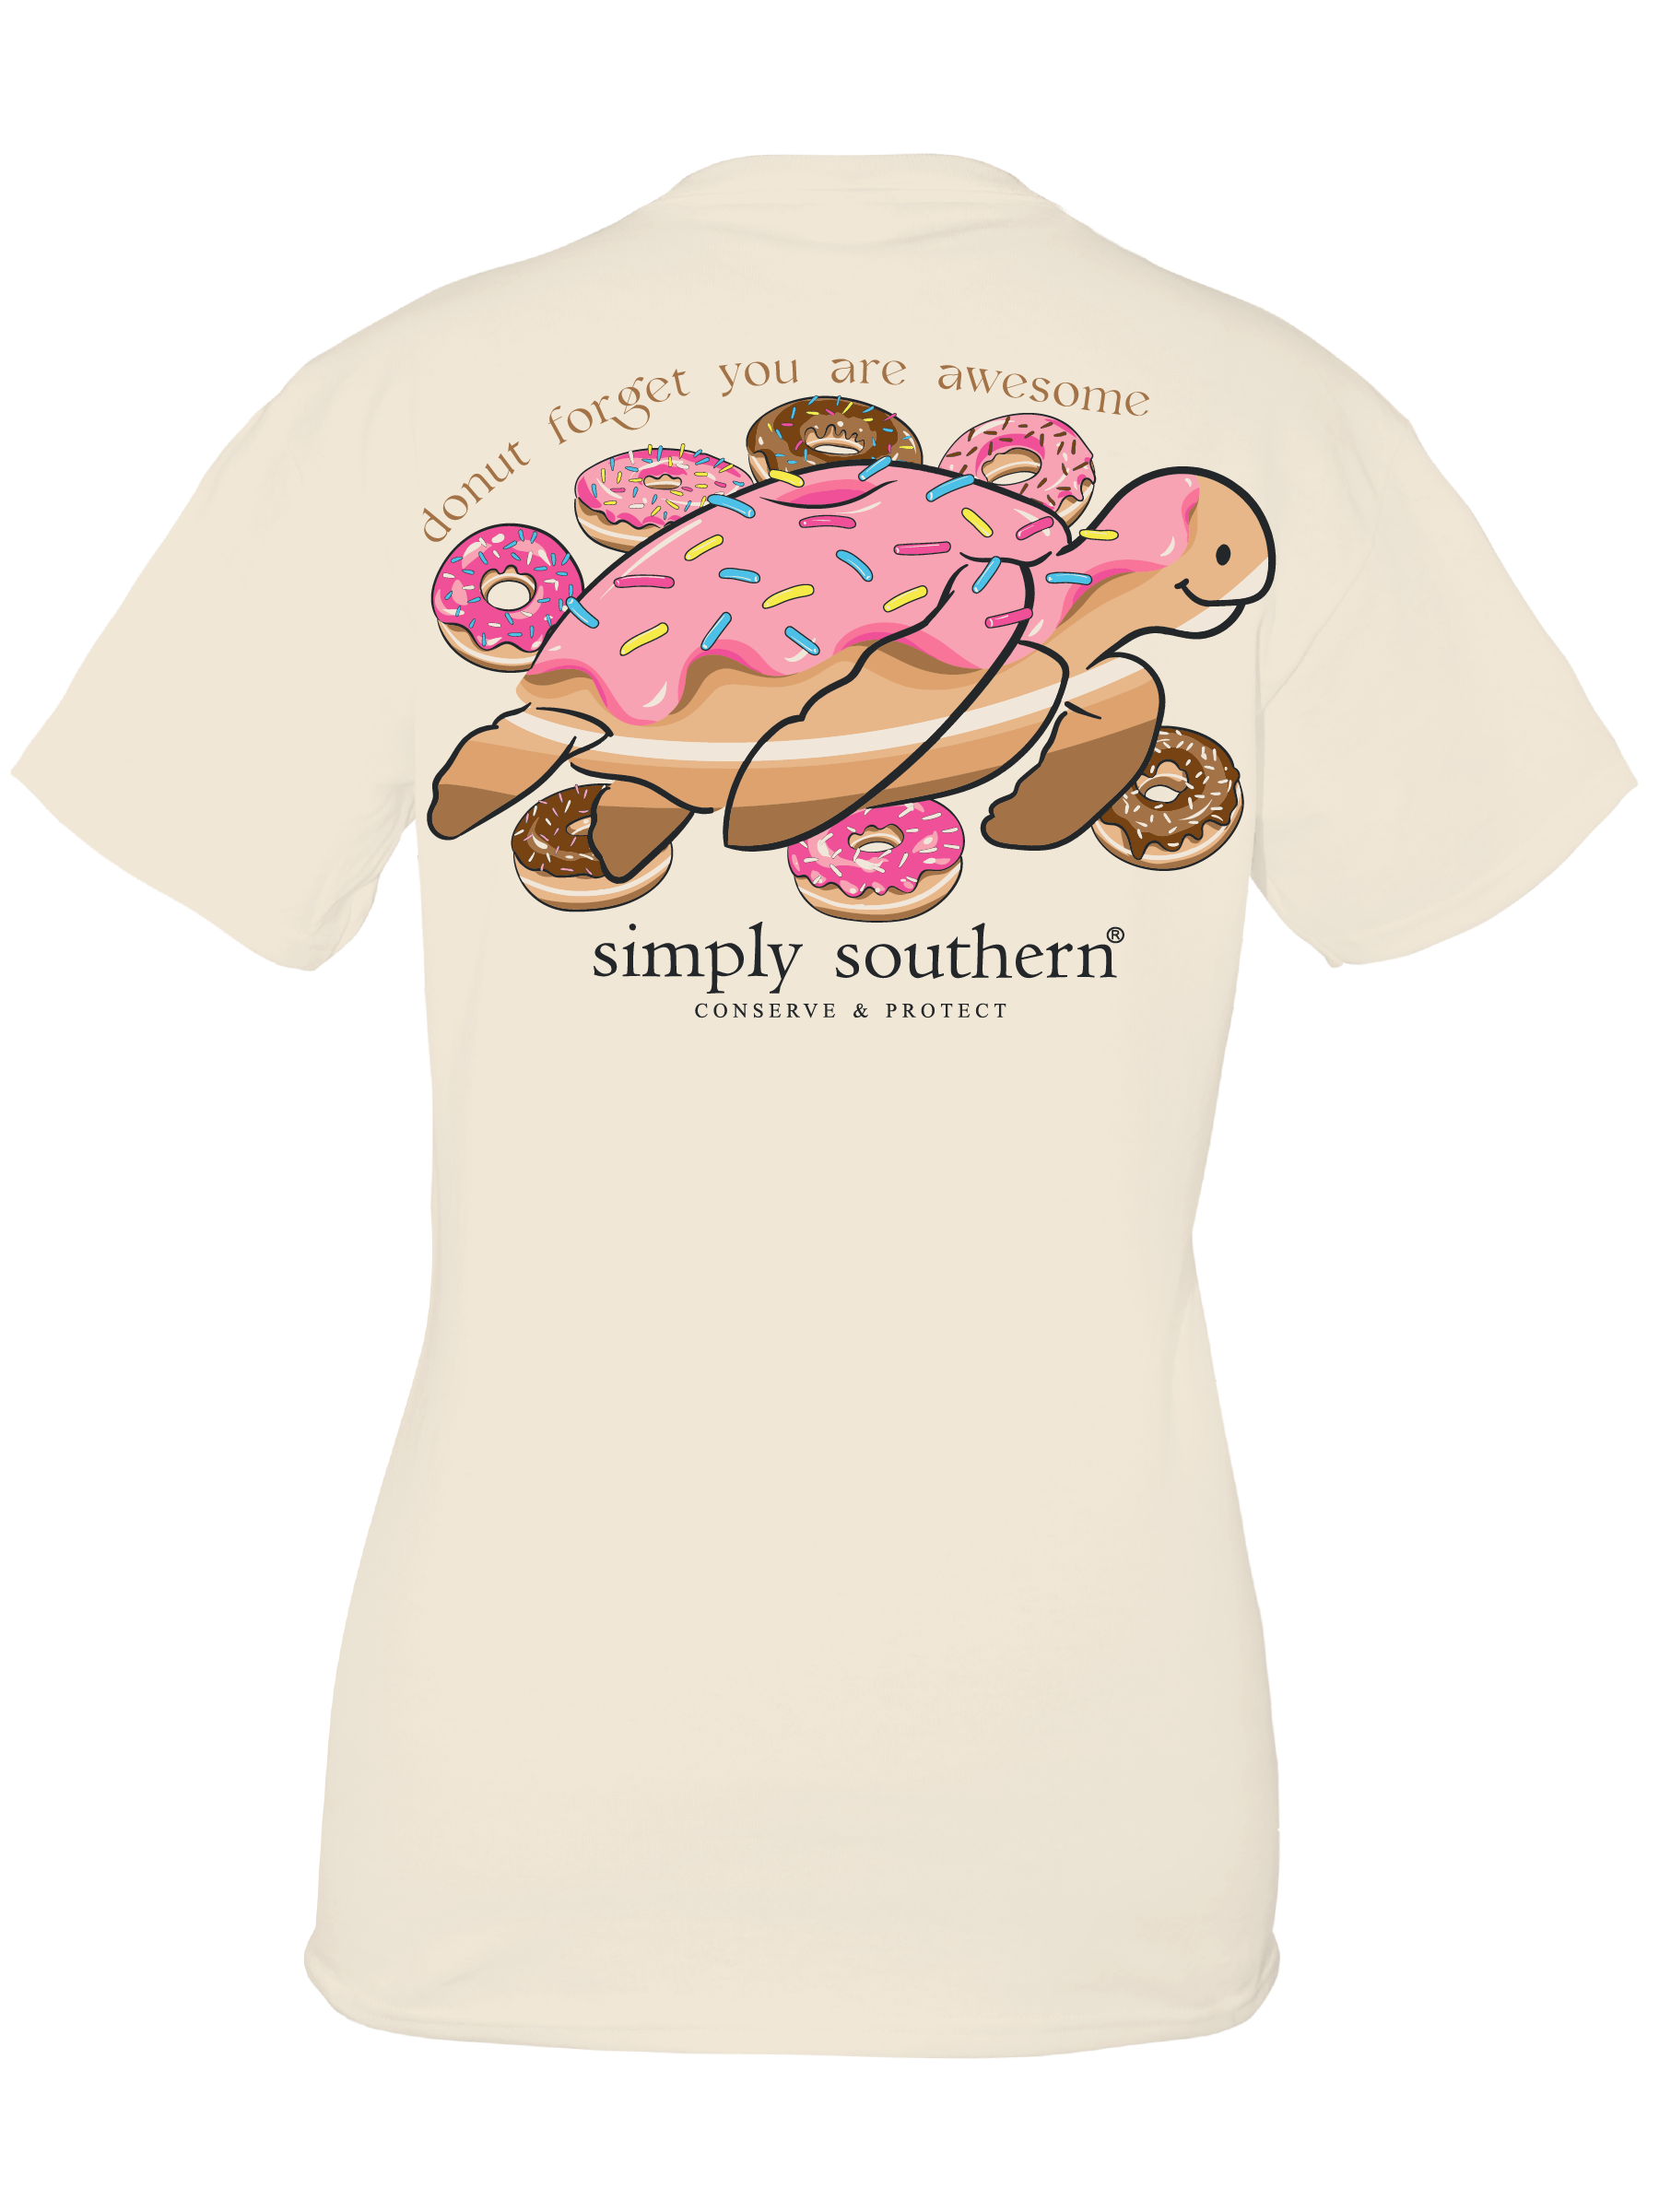 Donut Forget You Are Awesome Short Sleeve Tee